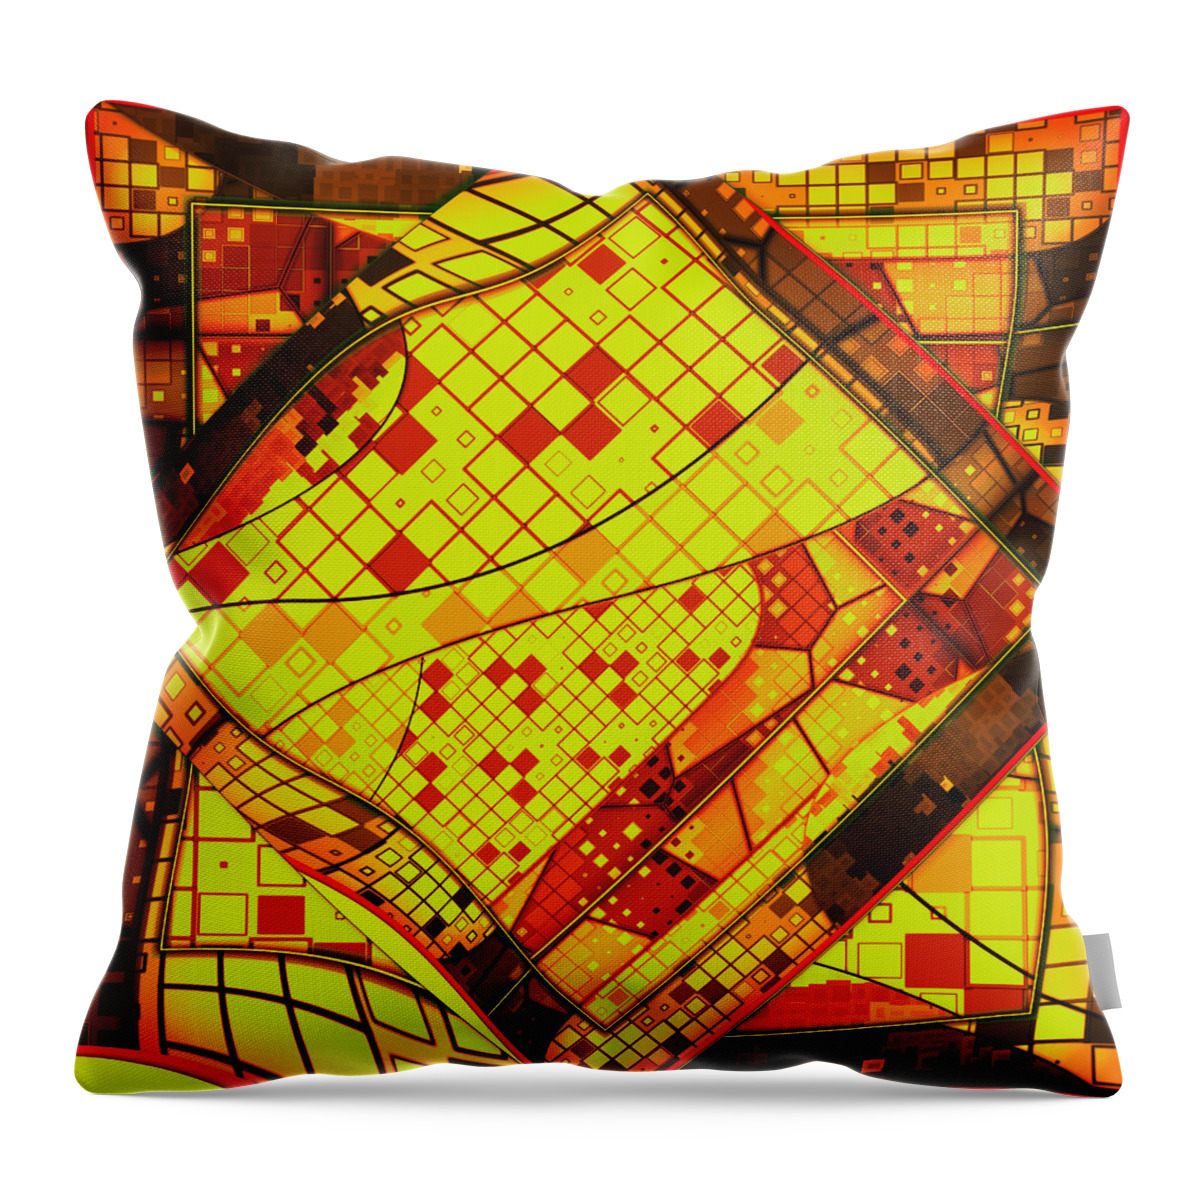 Red Throw Pillow featuring the digital art # 6 by Marko Sabotin